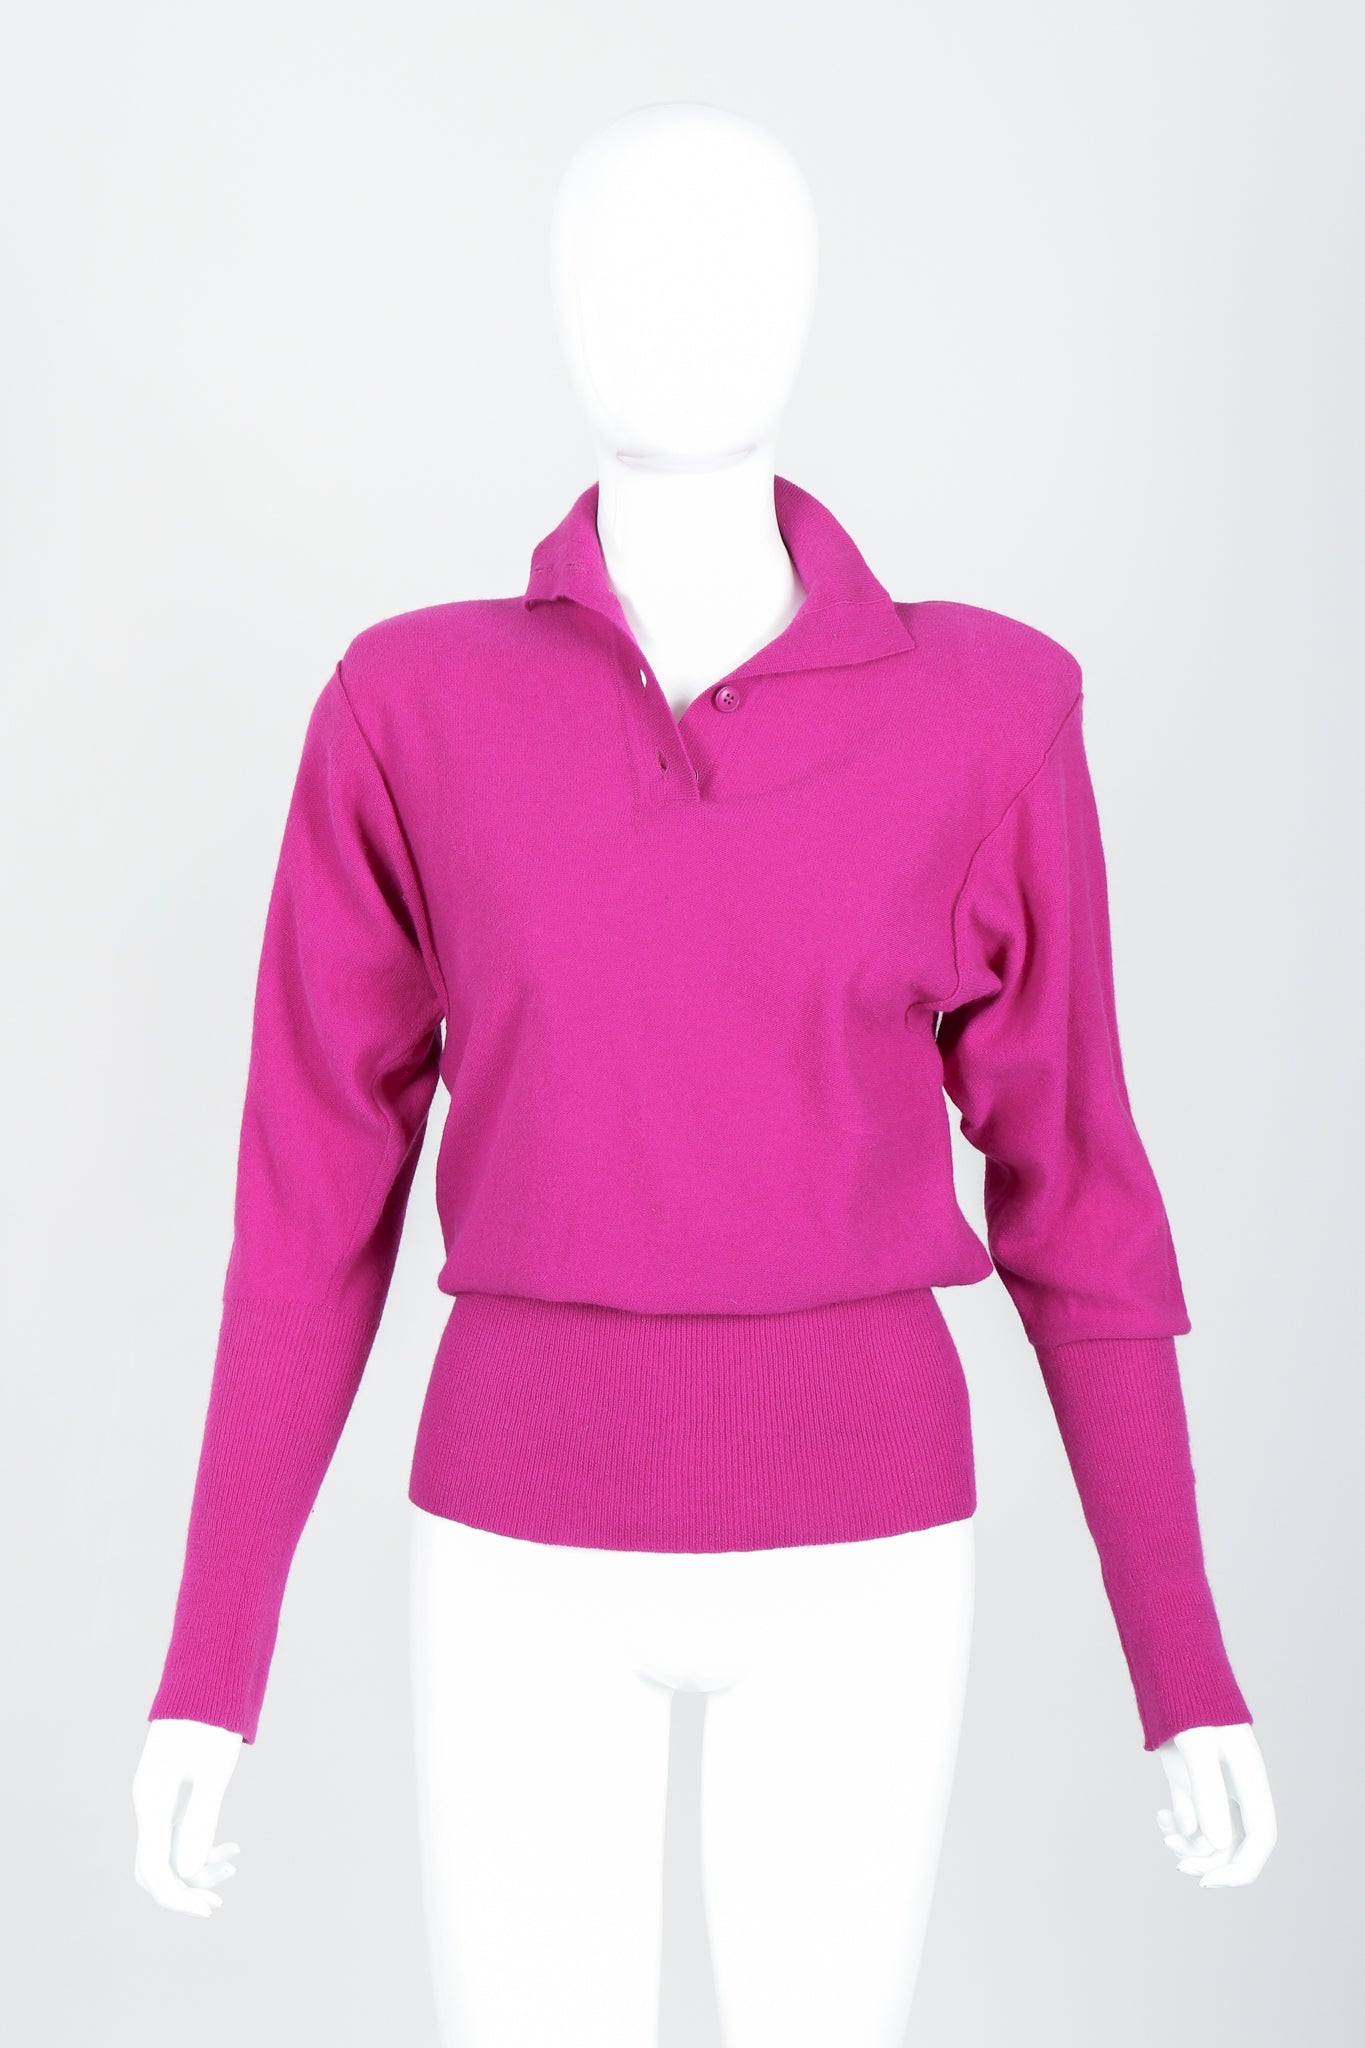 Vintage Sonia Rykiel Magenta Knit Popover Sweater on Mannequin Front at Recess